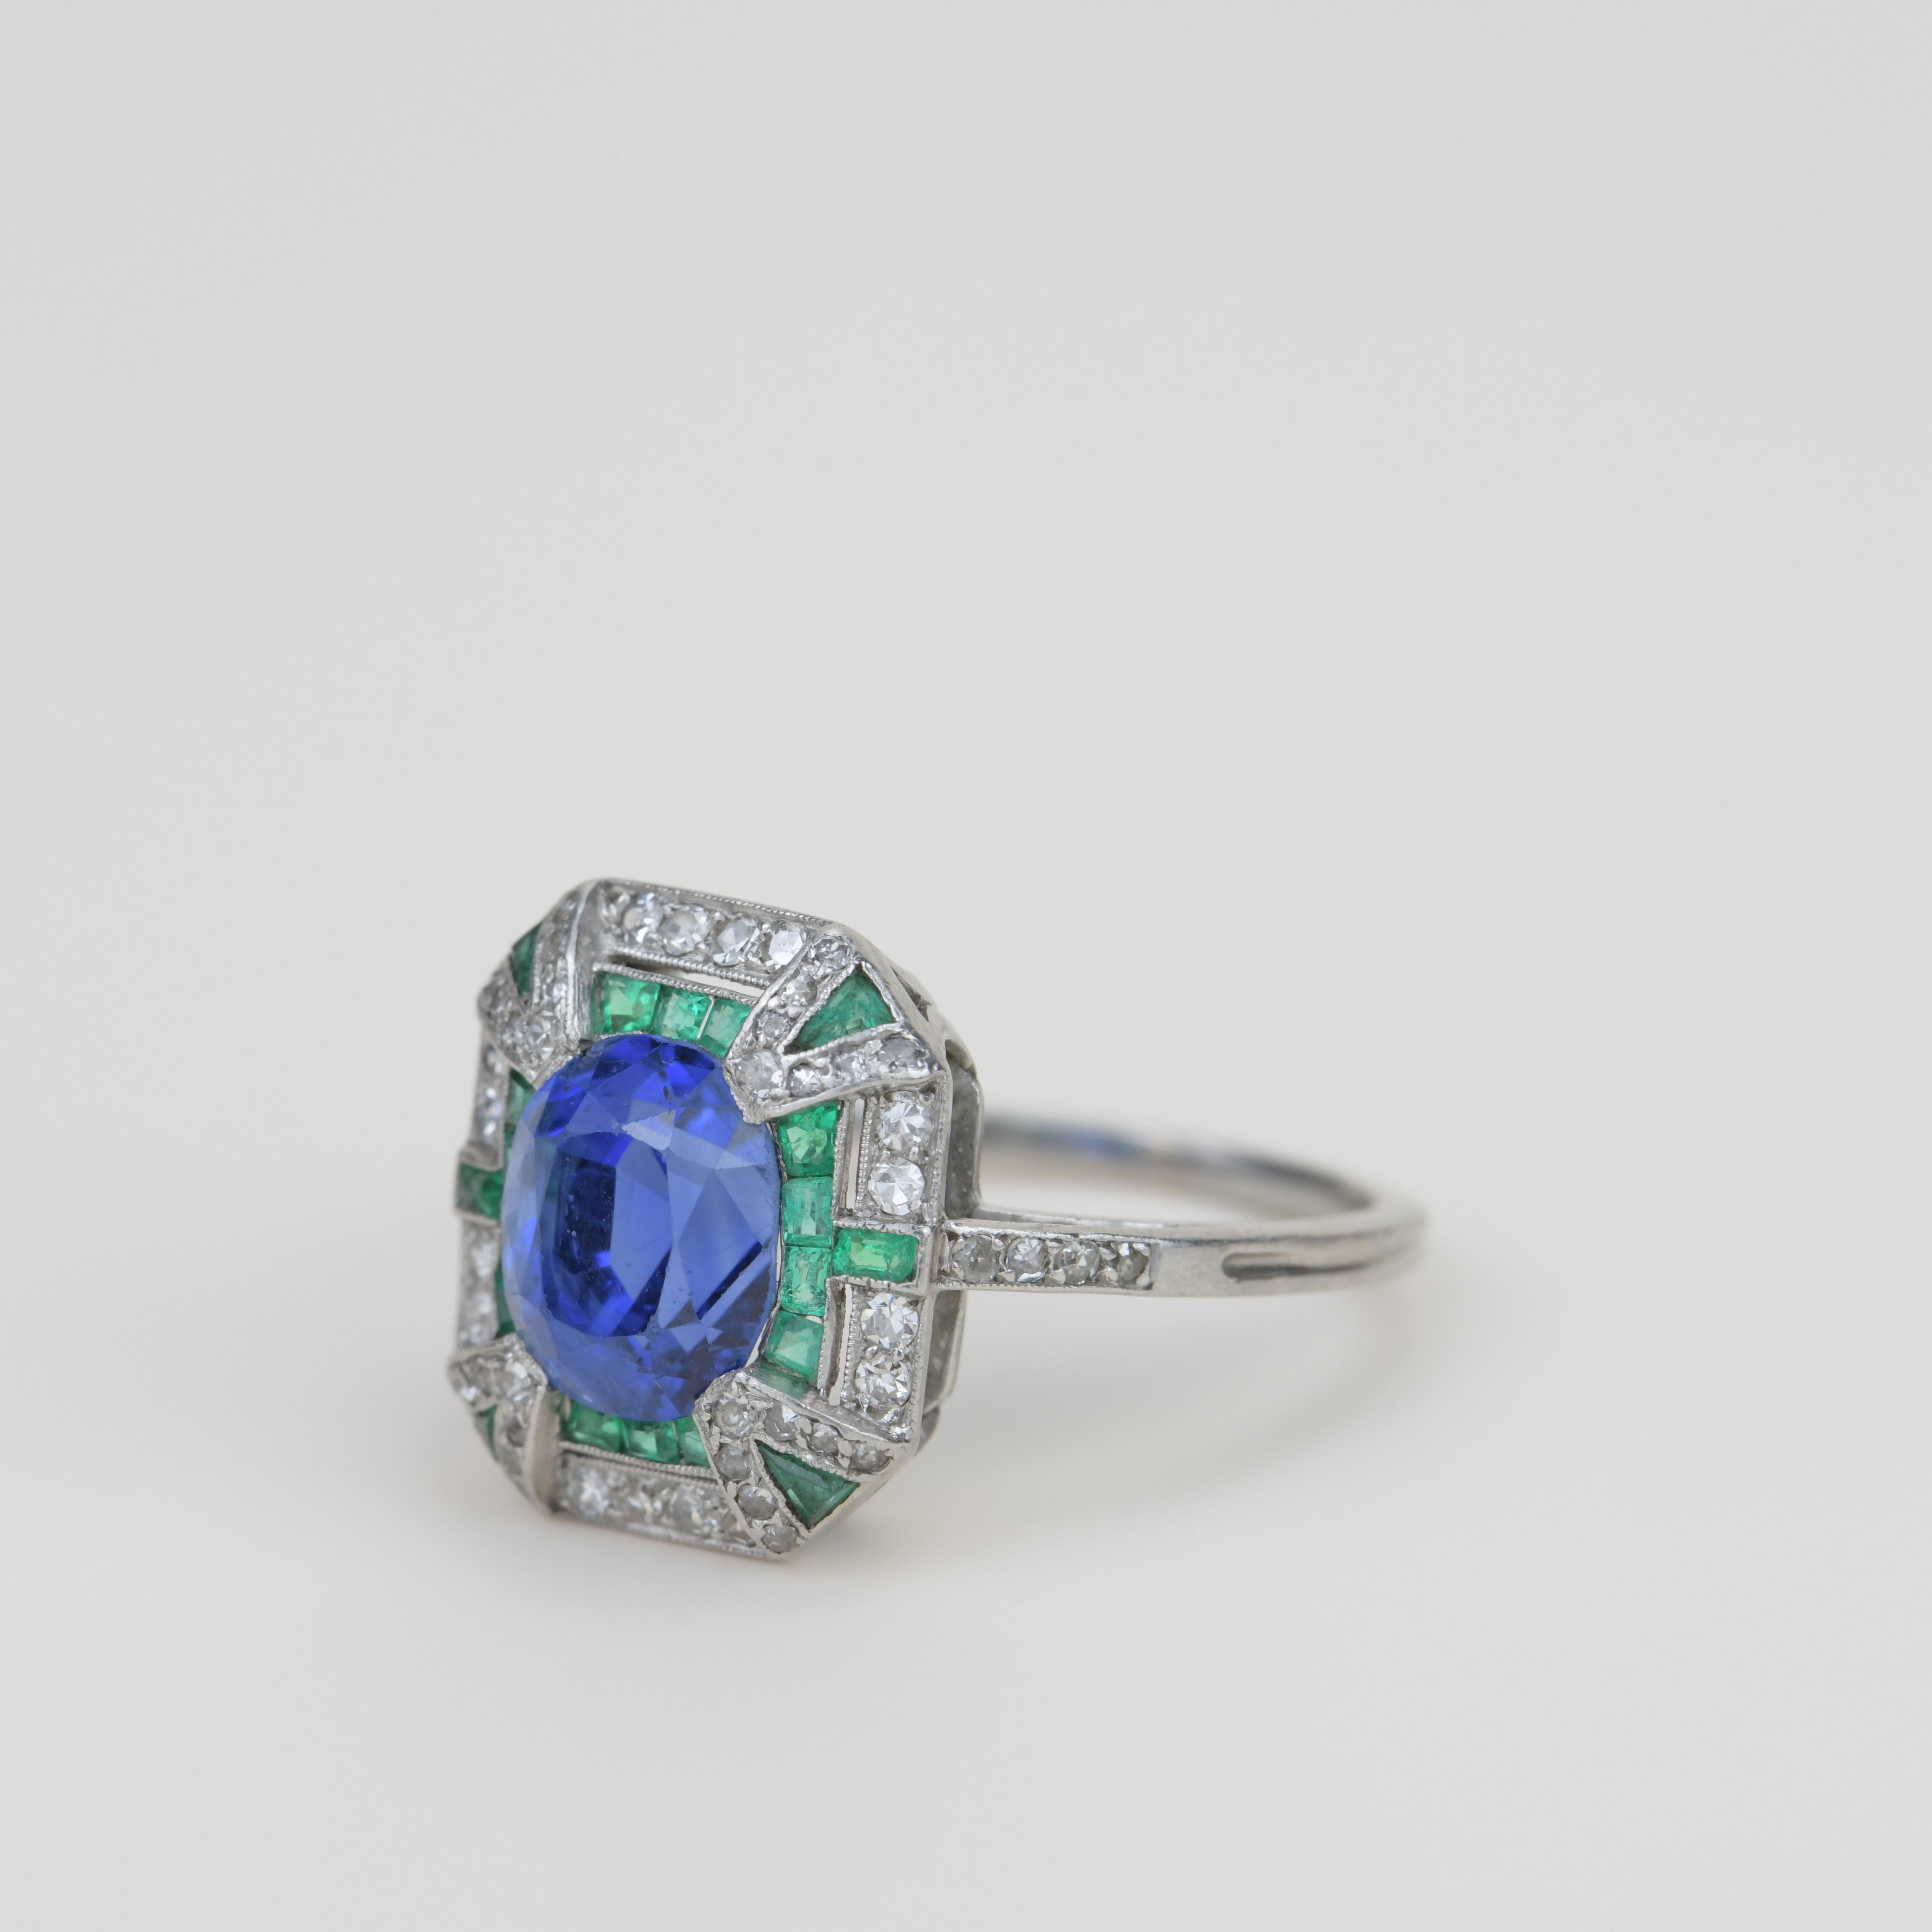 This is a stunning platinum ring that was made in the 1910s. It has been set with a beautiful 3.7carat no-heat gem-quality Ceylon sapphire with Gem Lab certification.

SKU                                     	AT-1629
Date	                           